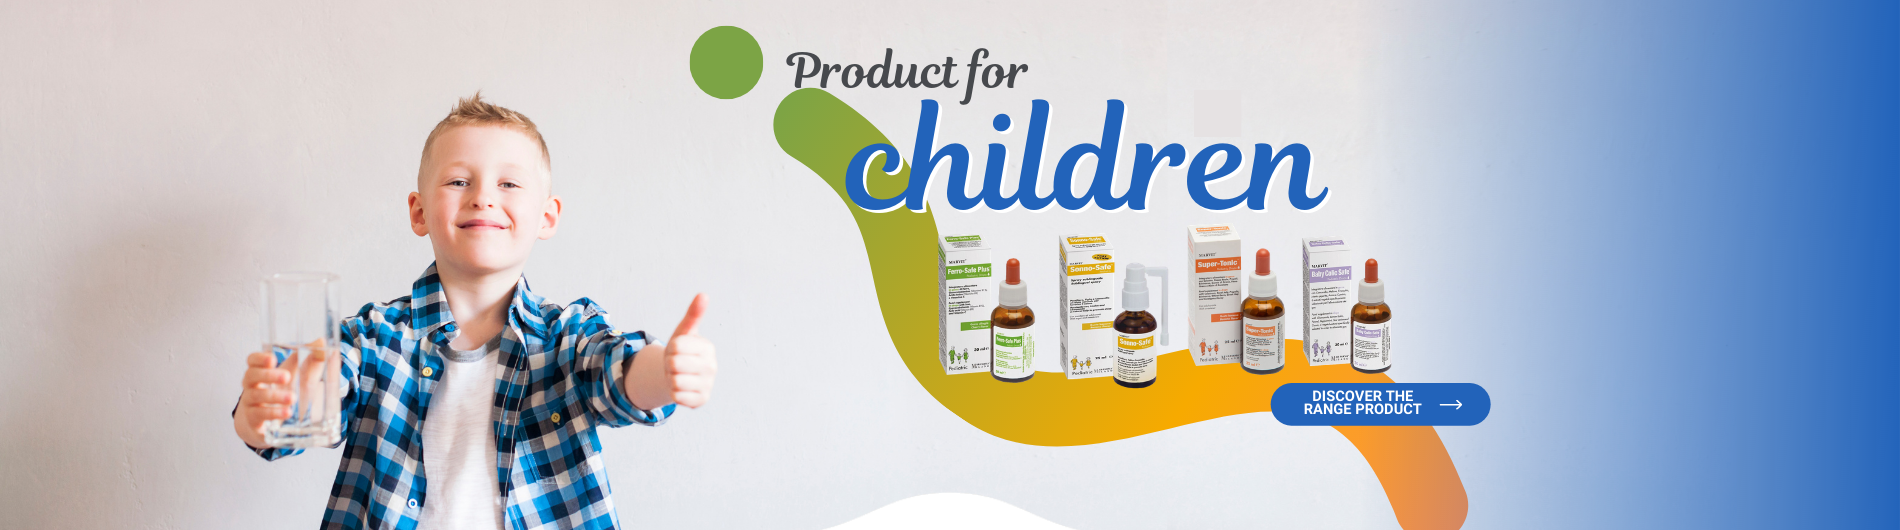 products-for-children